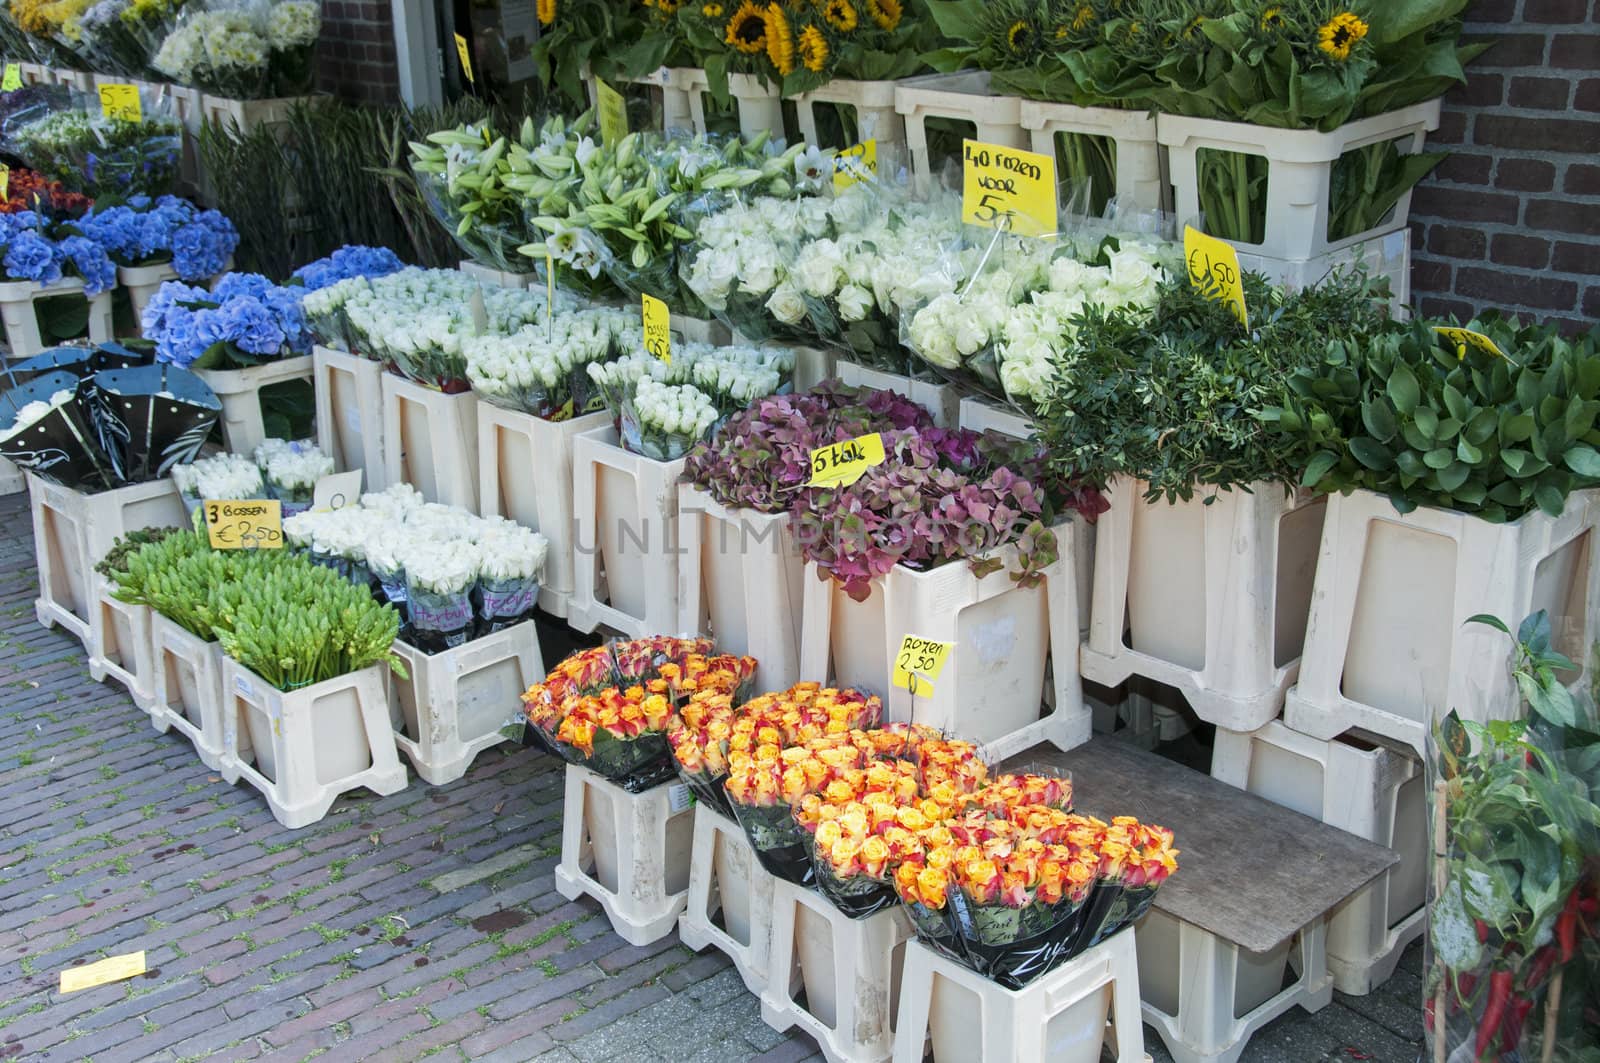 shop with flowers outside like roses and others